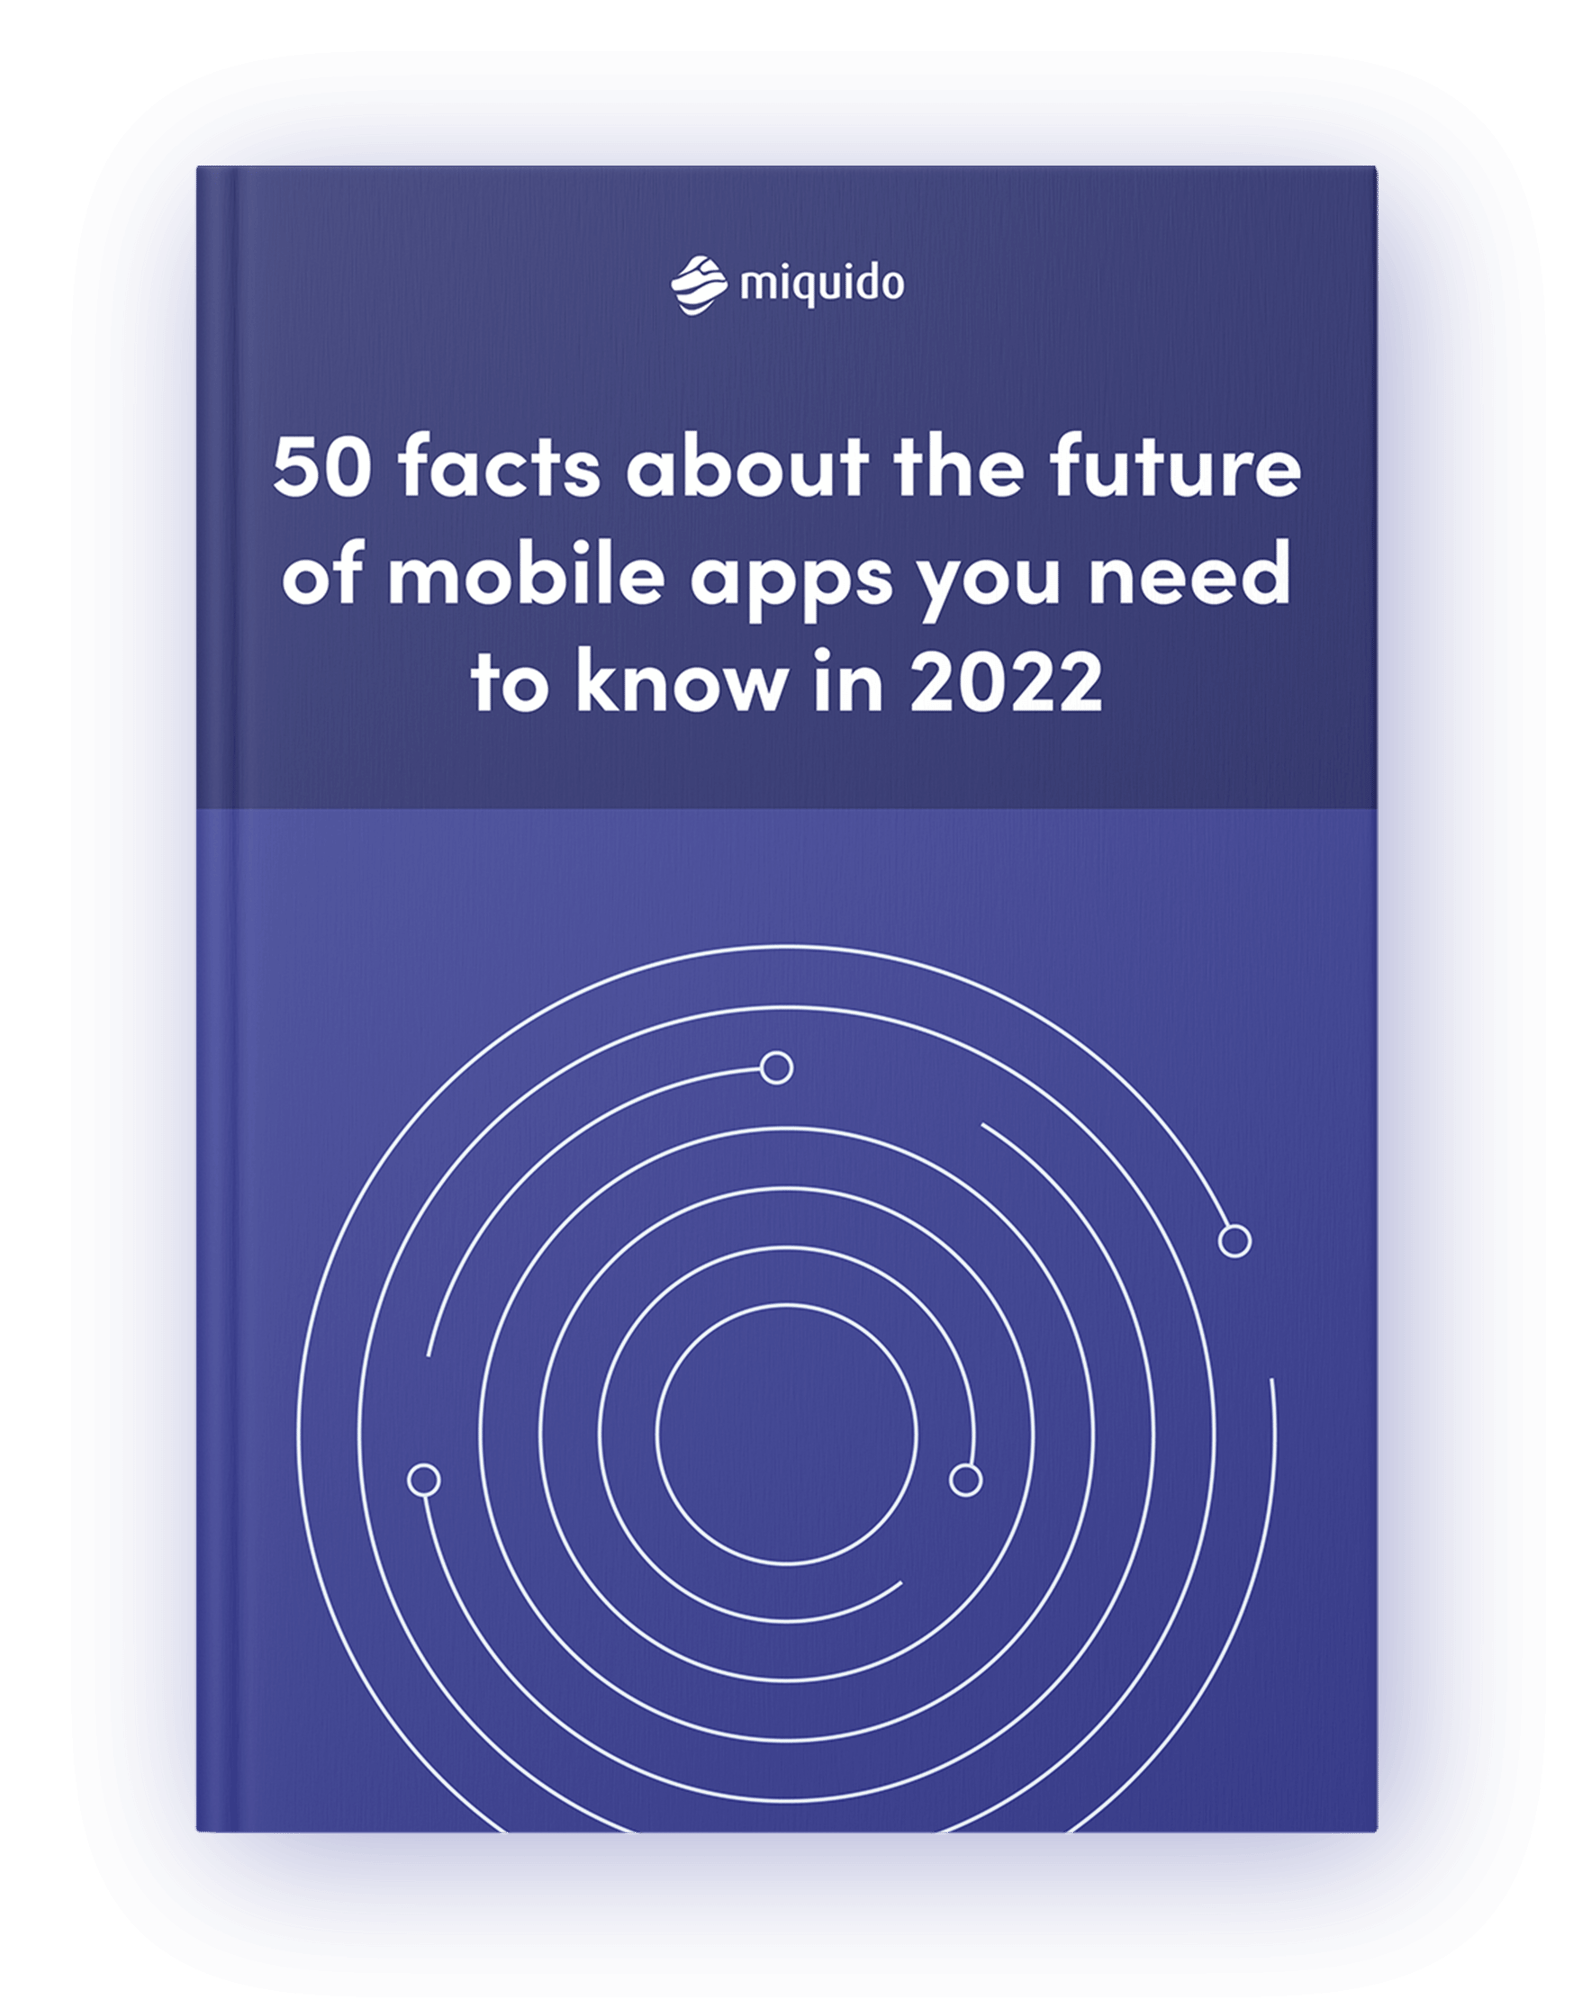 50 facts about the future of mobile apps you need to know in 2022 – Shadow book cover mockup (2) (1)